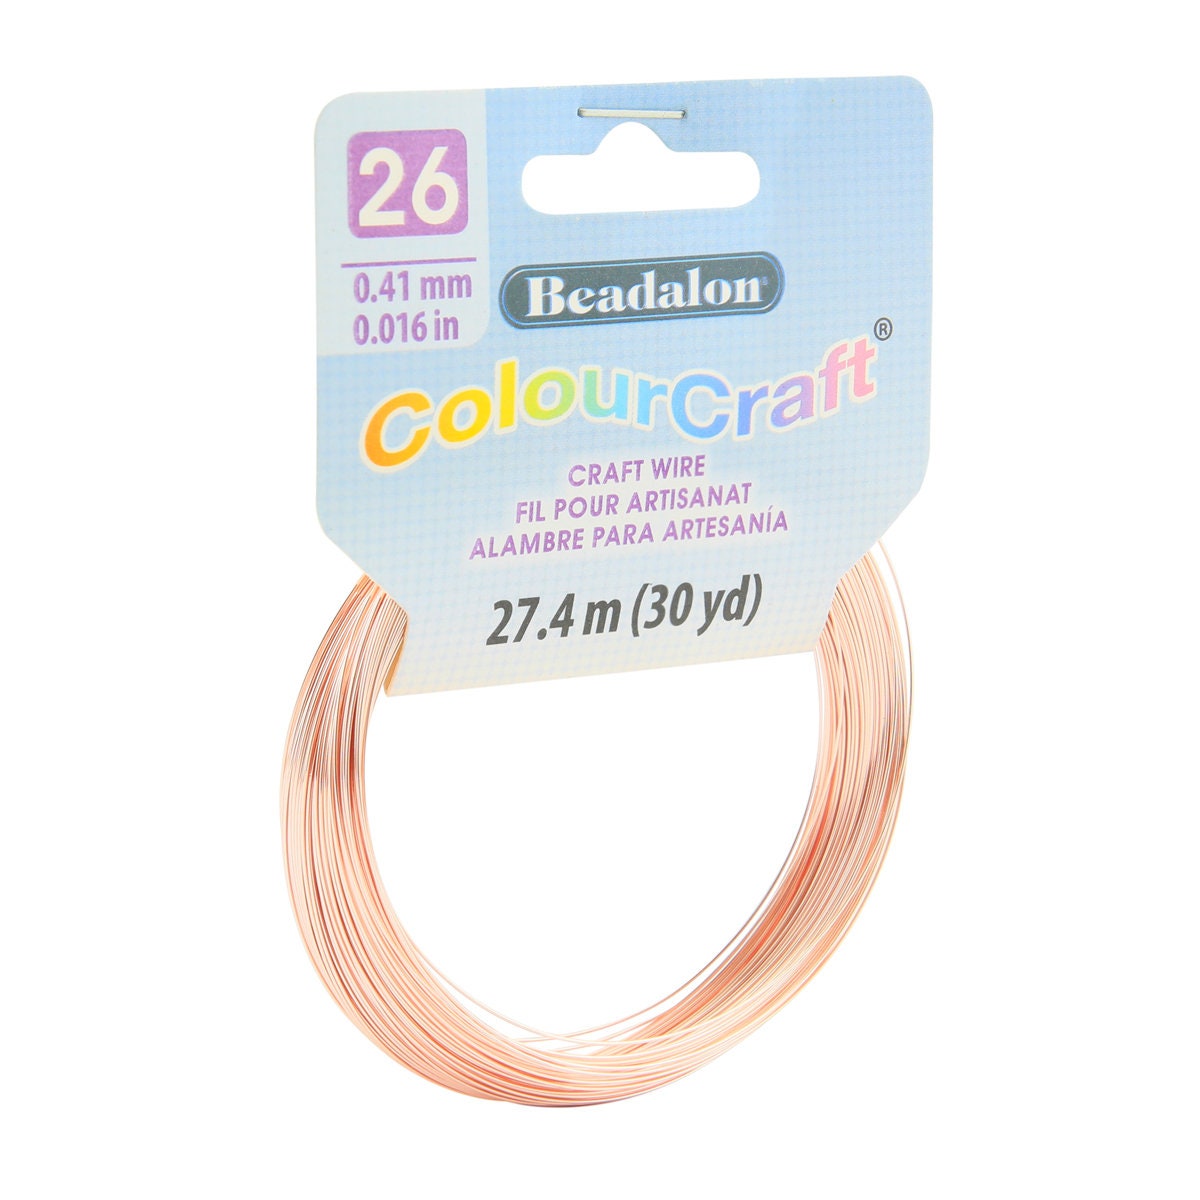 0.8mm X 10m Aluminium Wire Choice of Colours Thin Gauge Jewellery Modelling  Craft Florist Findings 